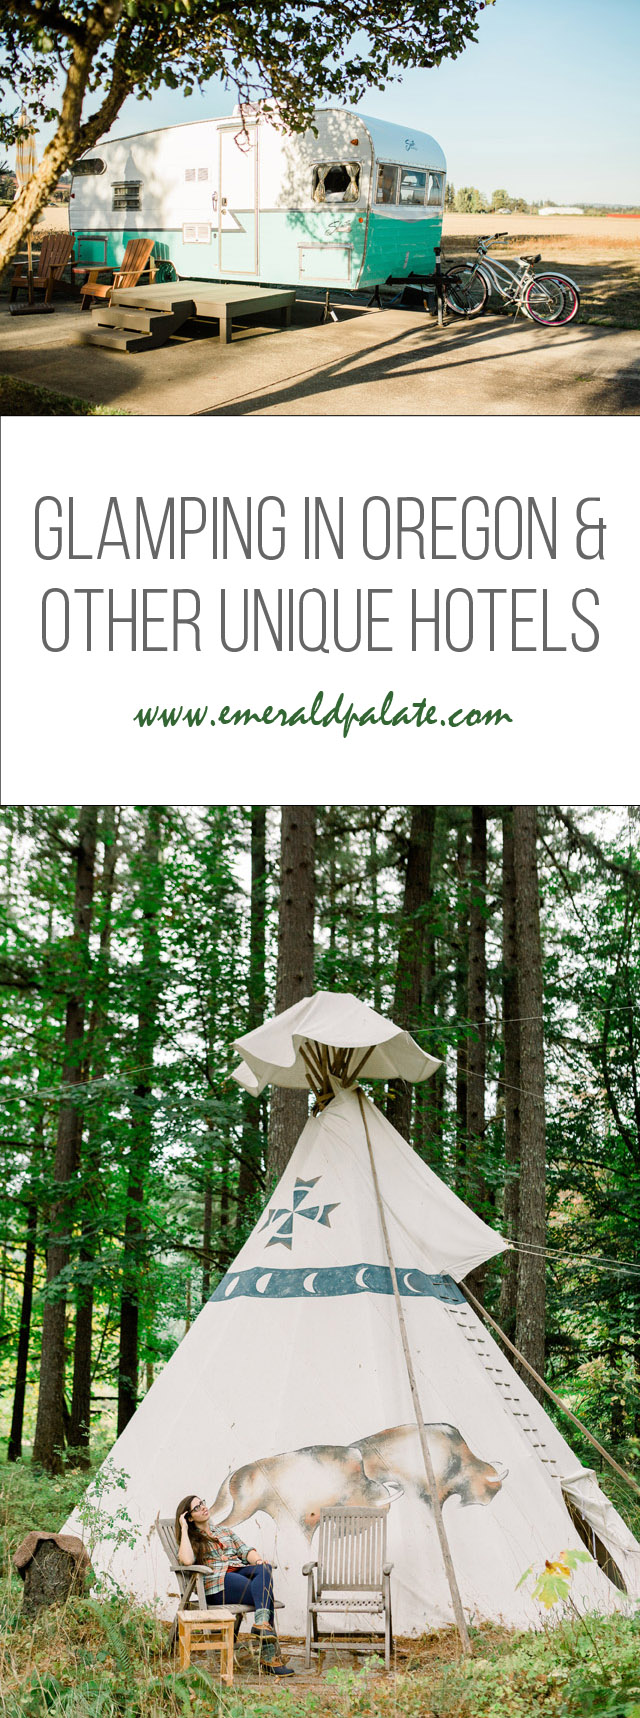 Looking for unique hotels in Oregon? Want to go glamping in Oregon? Visiting Willamette Valley? Then this is the ultimate glamping guide for you! It outlines all the unique wine country glamping in Oregon and other unique hotels in Oregon wine country!